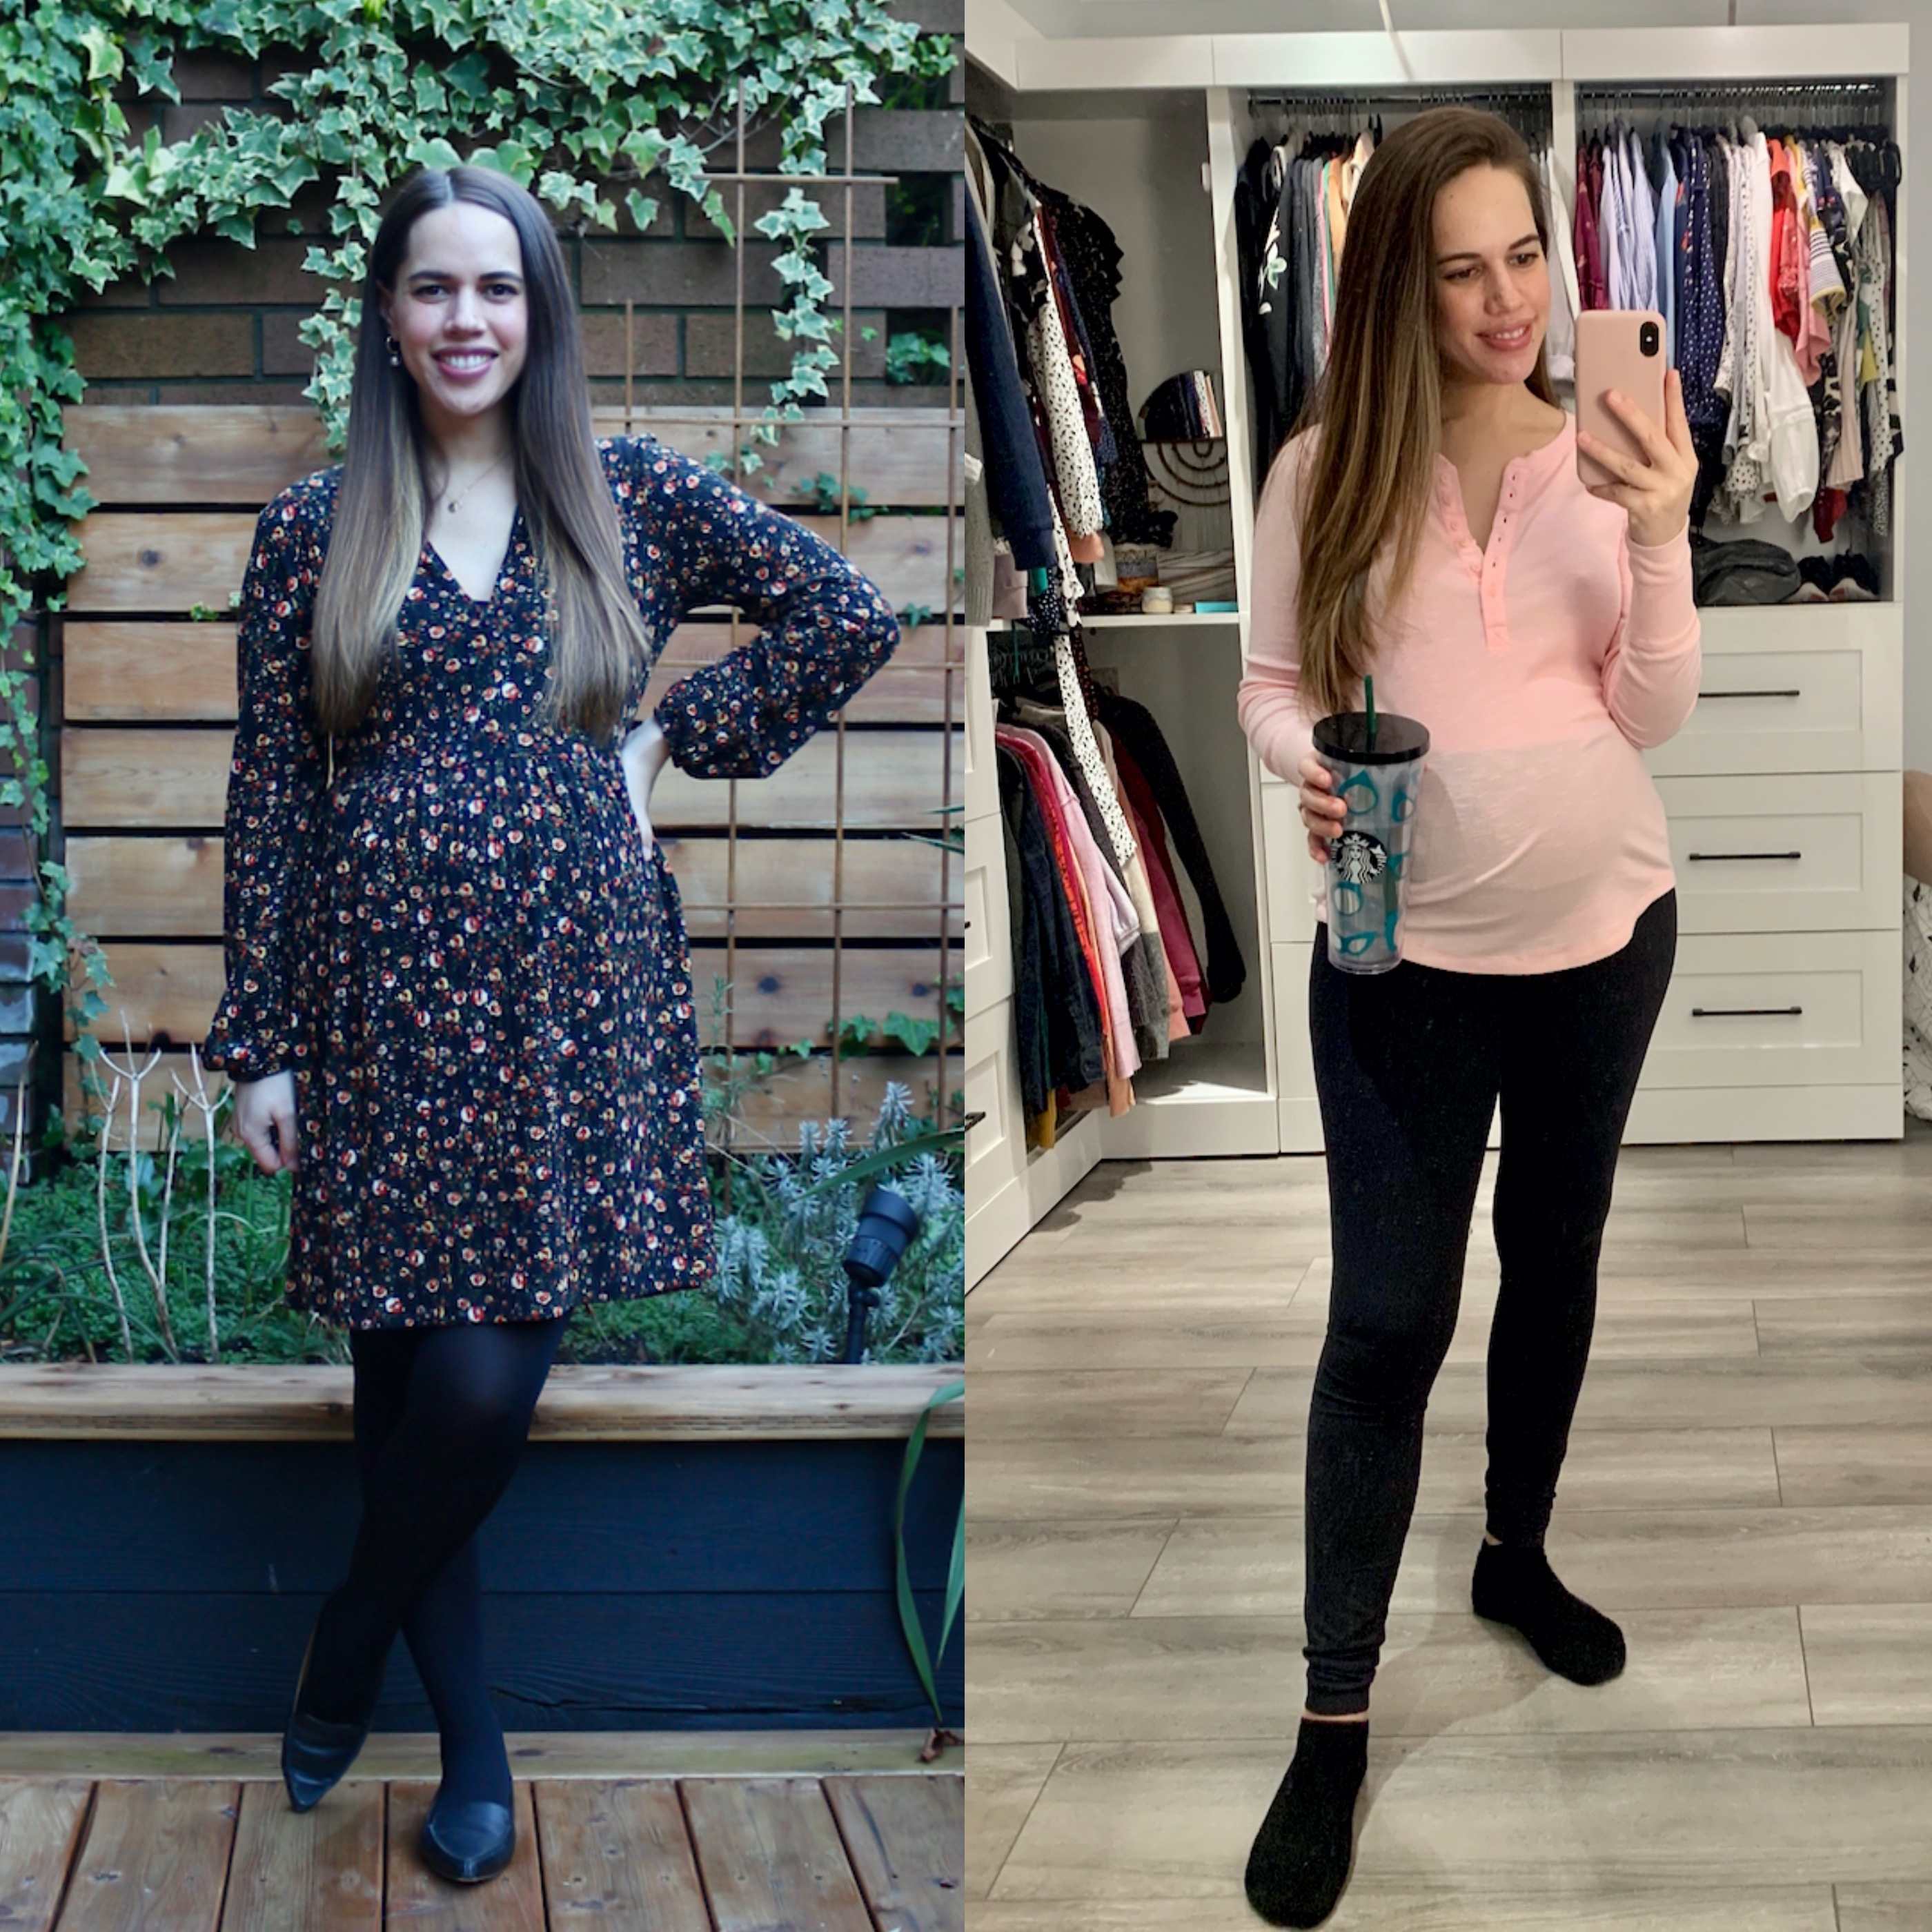 Jules in Flats - What I Wore to Work in February (Business Casual Workwear on a Budget) Week 2